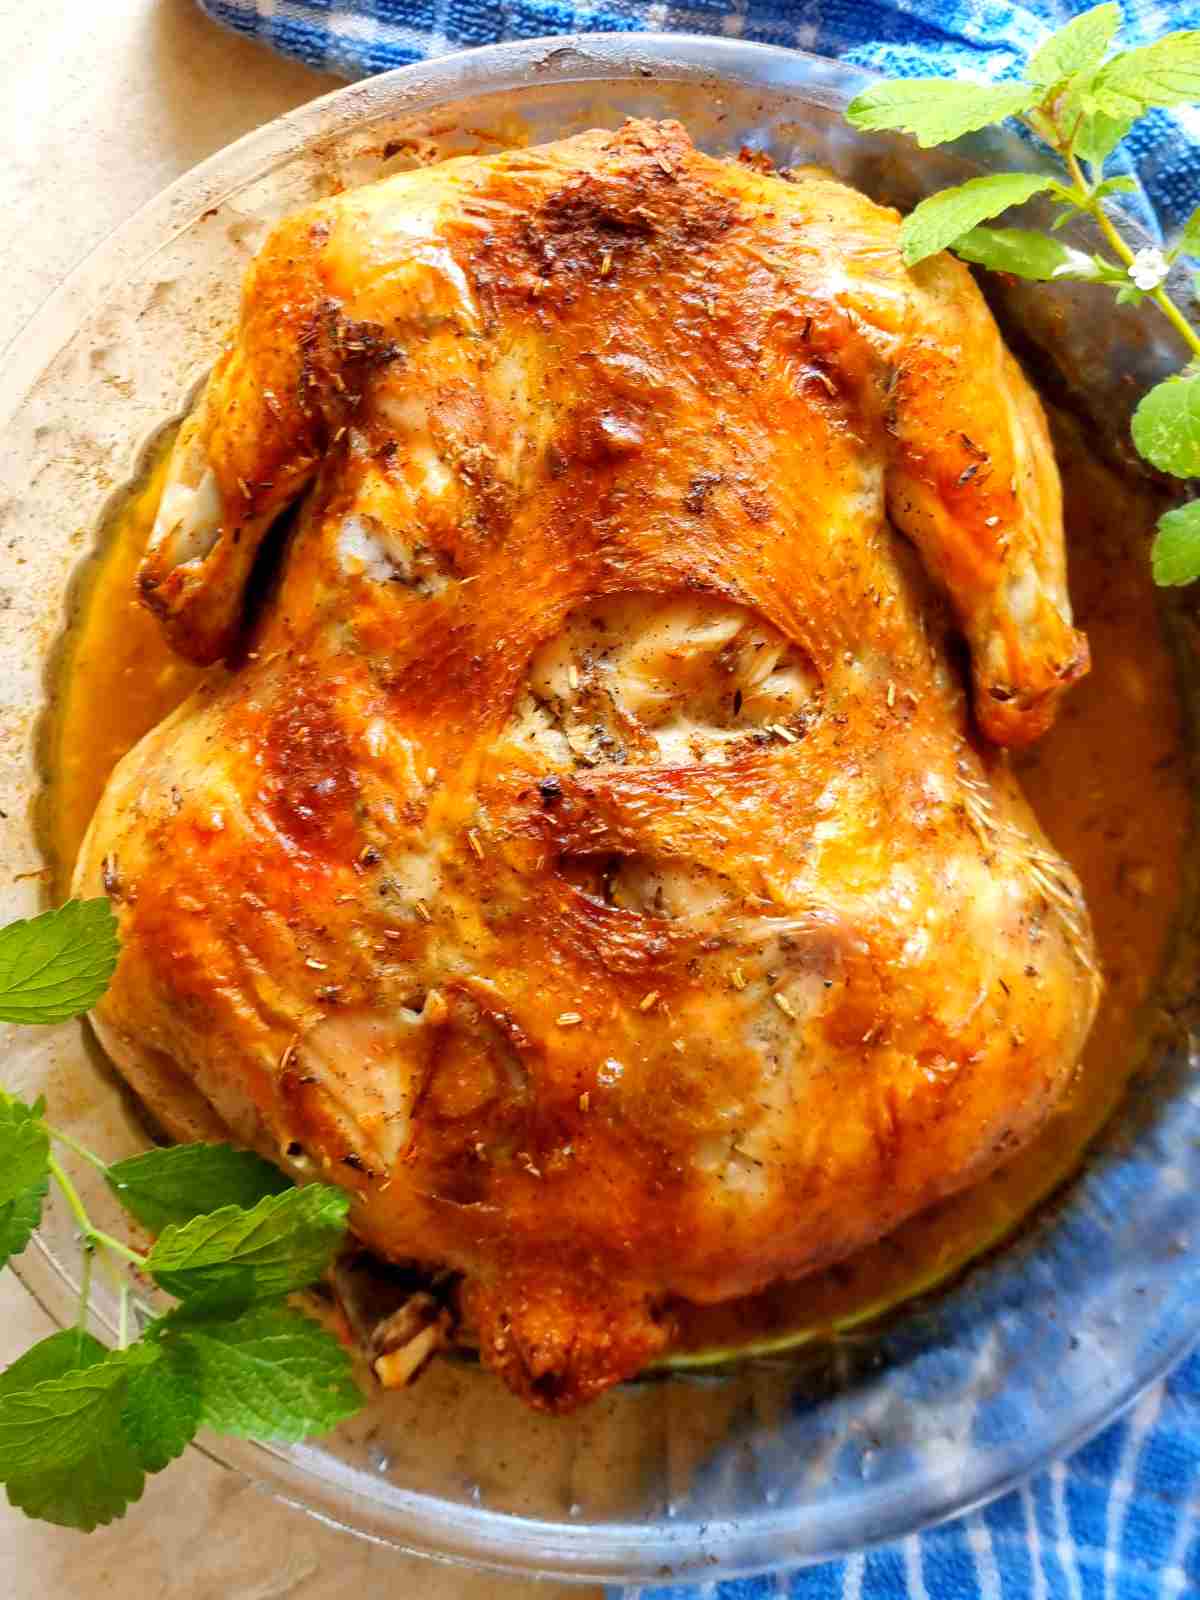 Roasted whole chicken in a dish.